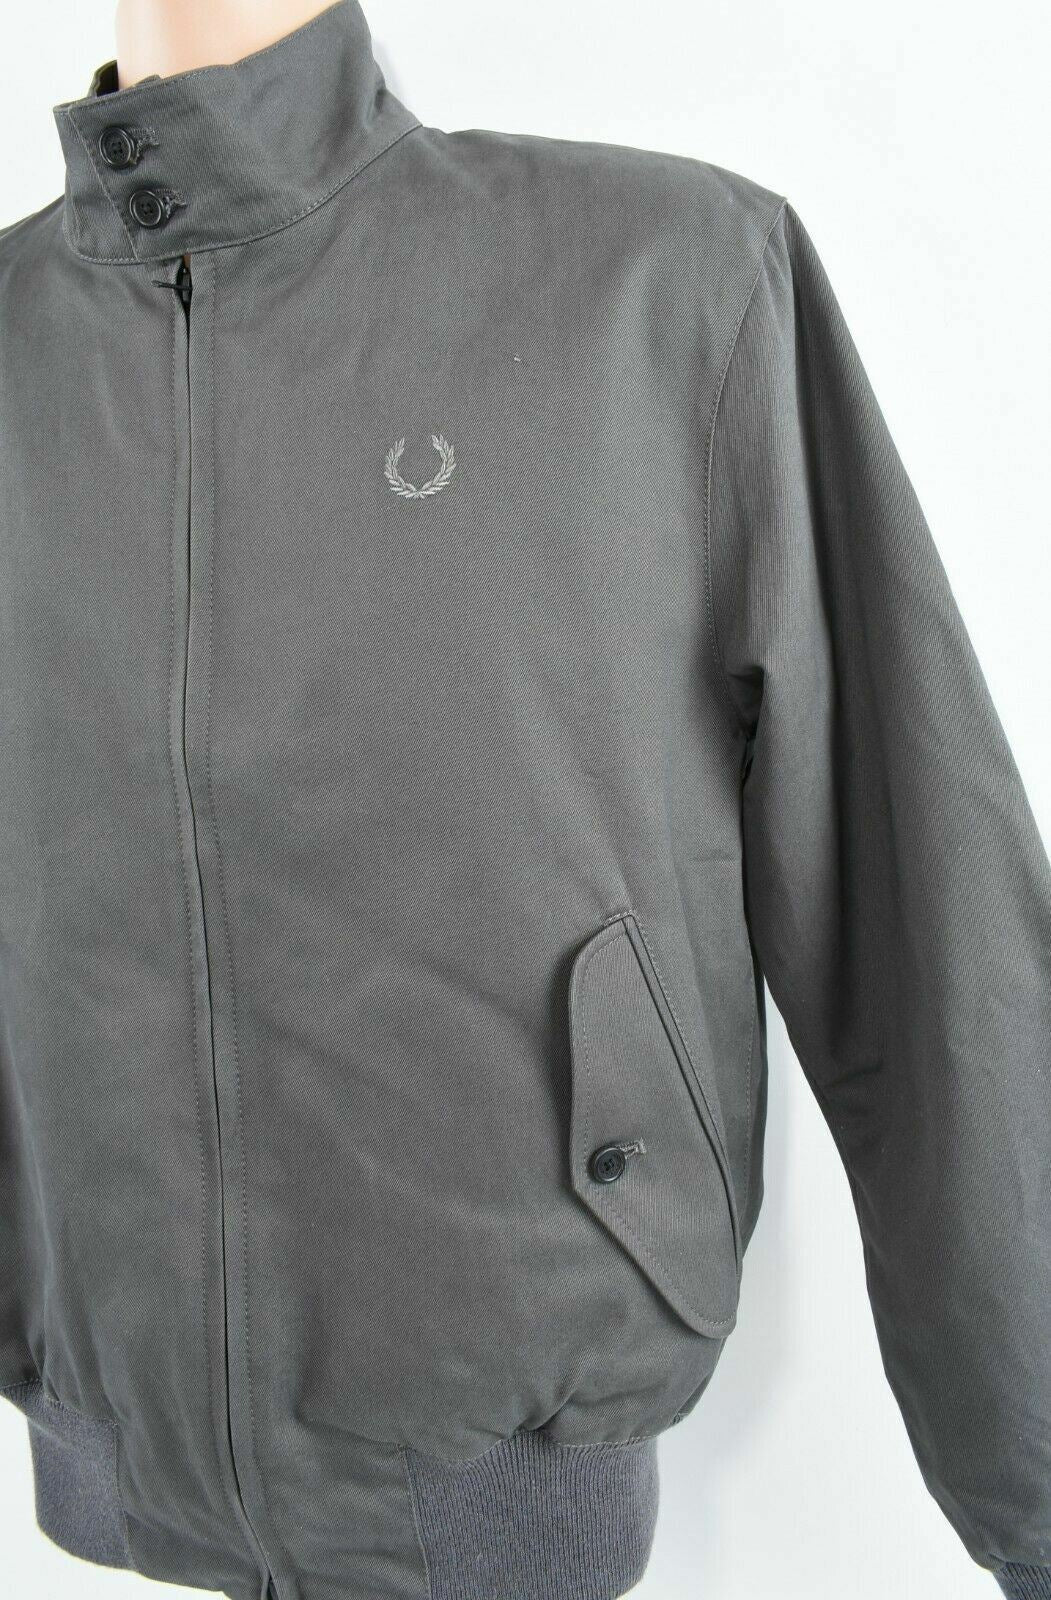 FRED PERRY Men's Cotton Jacket, Dark Olive Green, size XS chest 36"